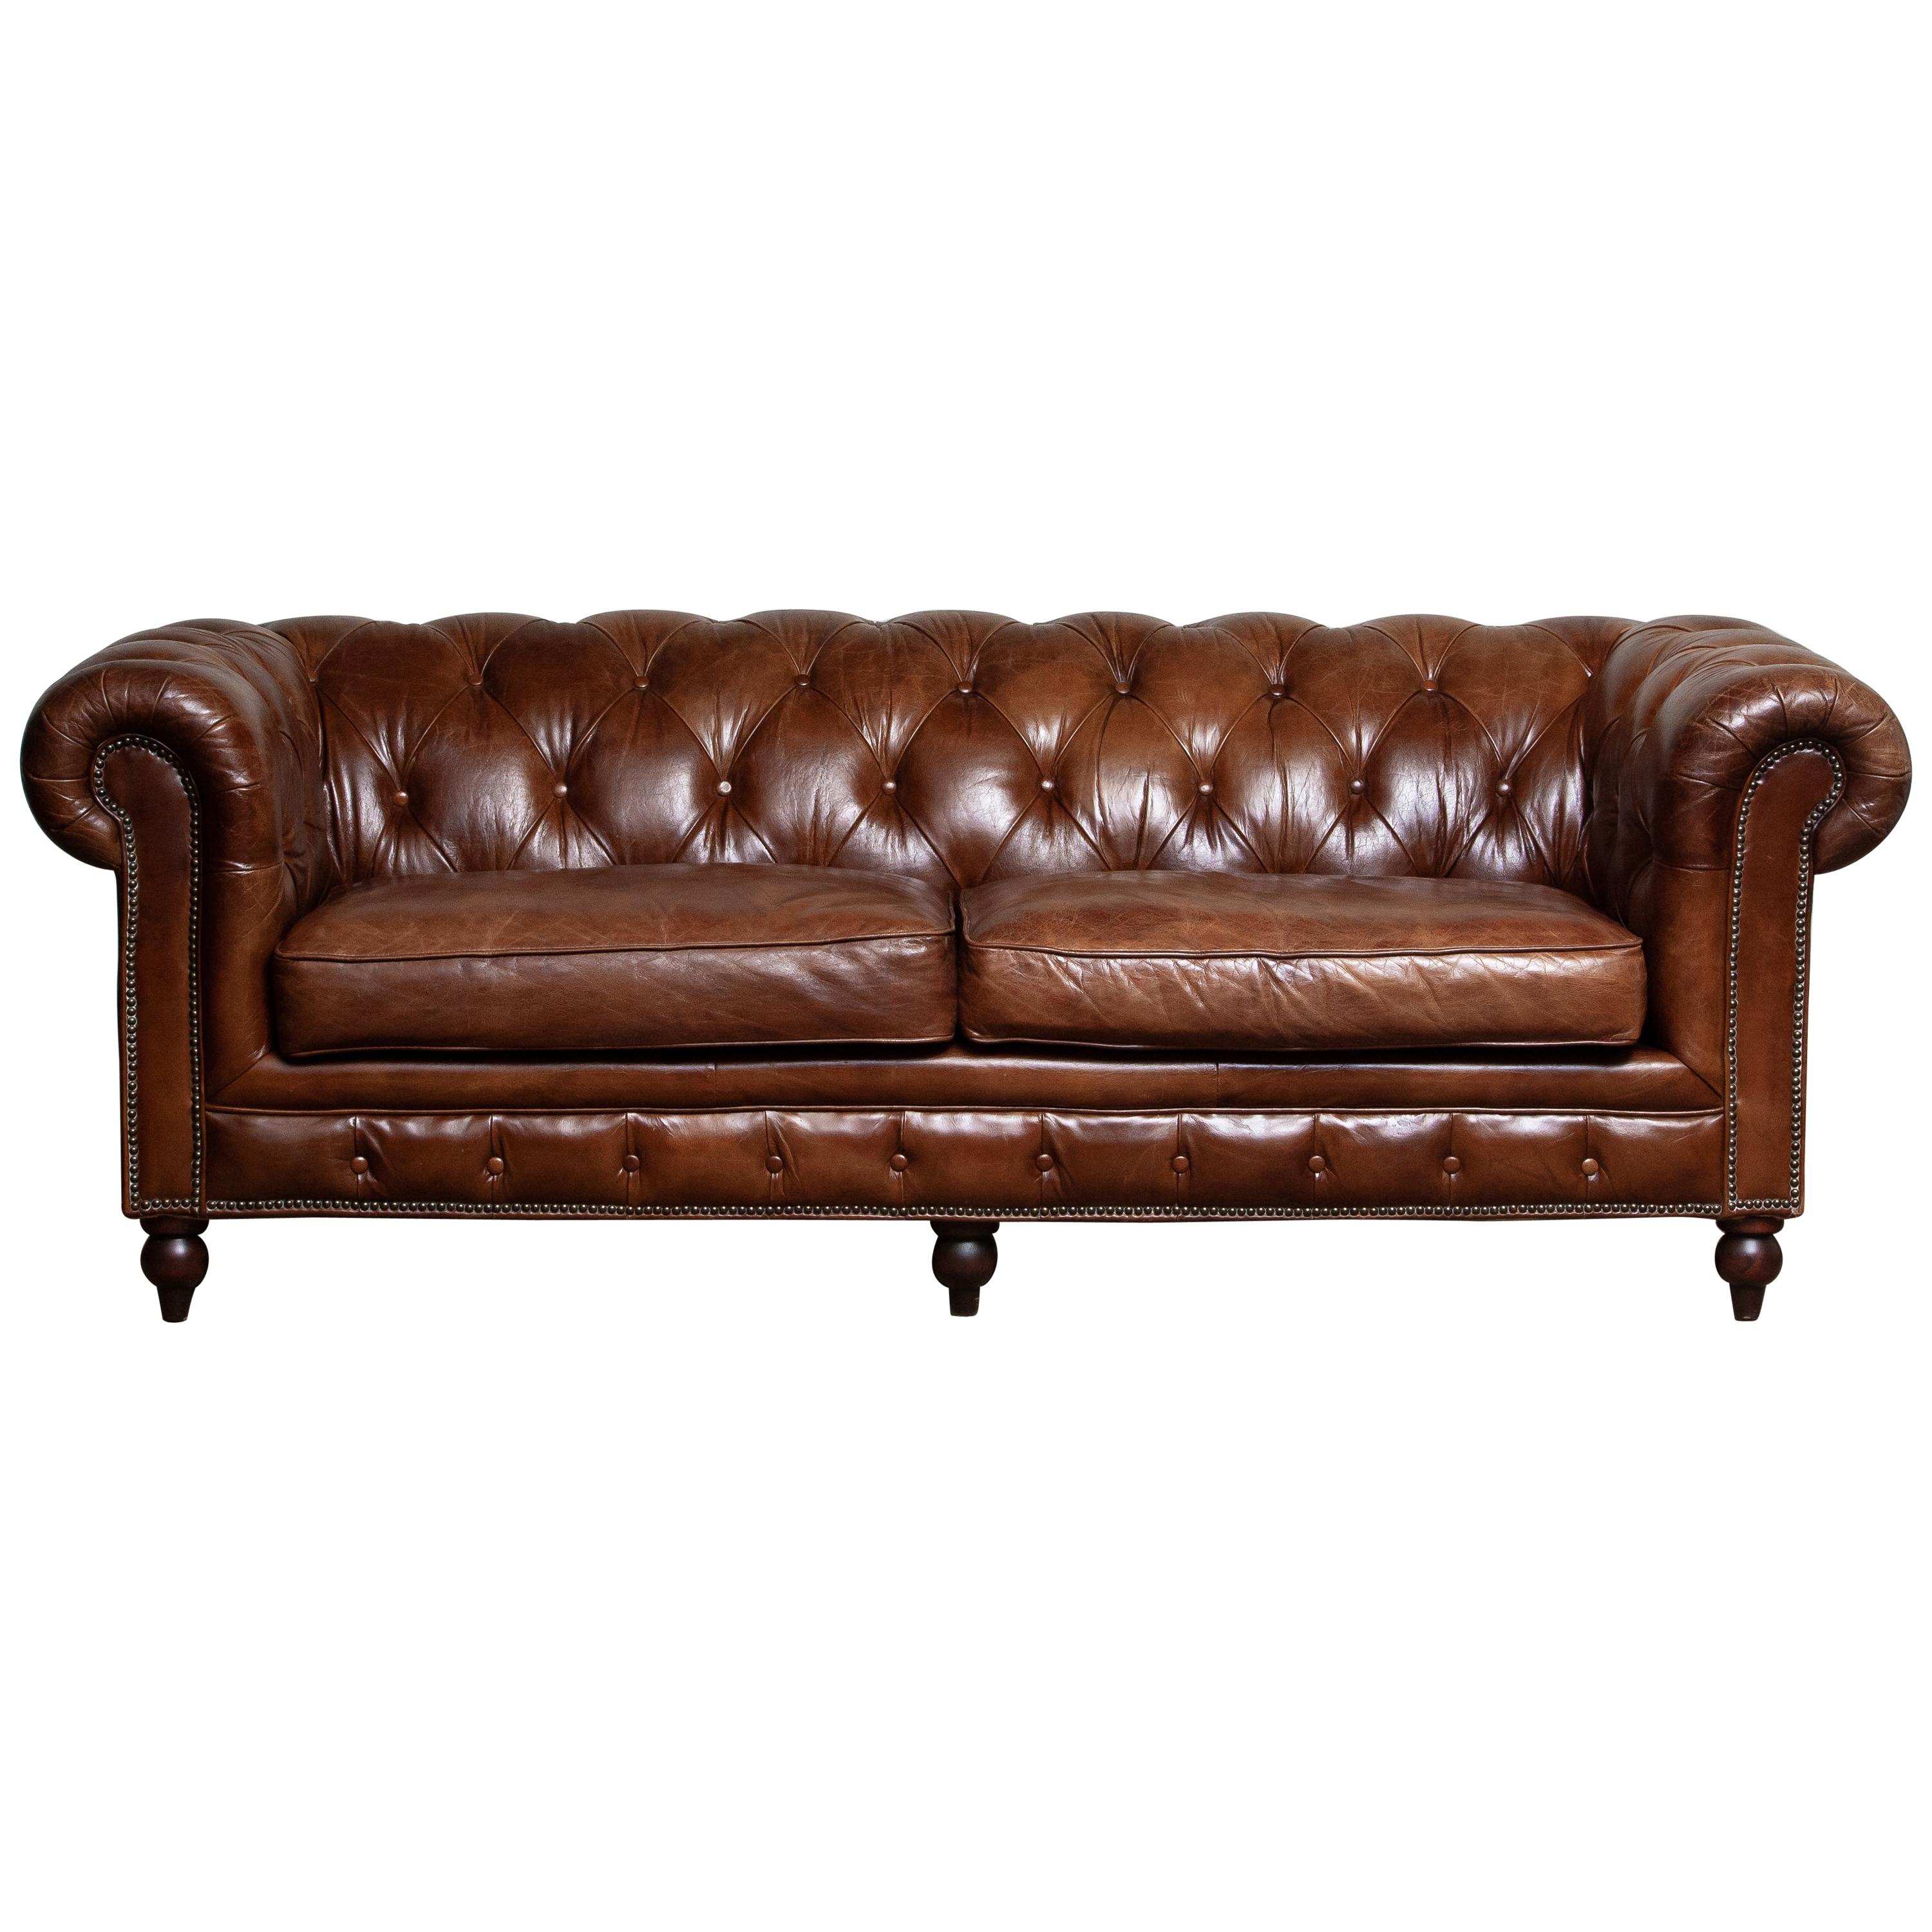 Tufted Brown Leather English Chesterfield Sofa from the 20th Century